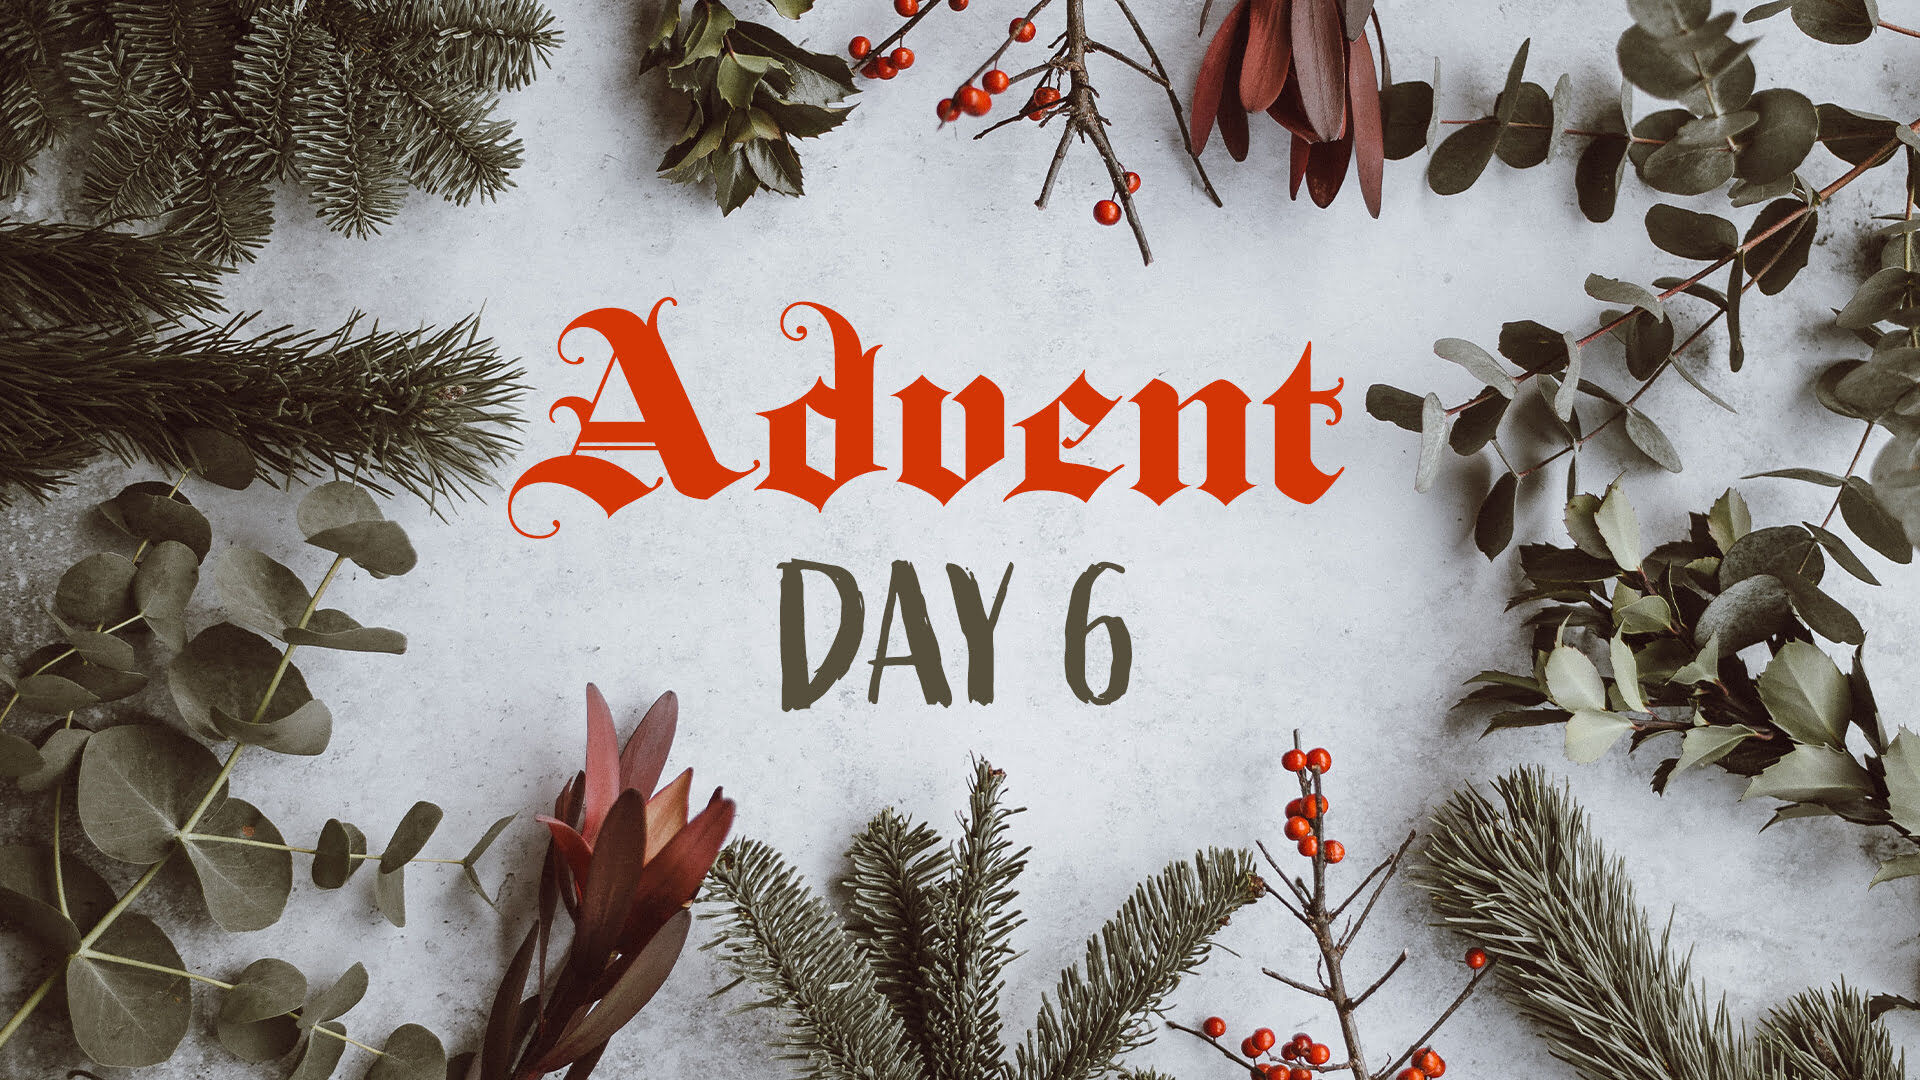 hillside-church-article-img-advent-day-6